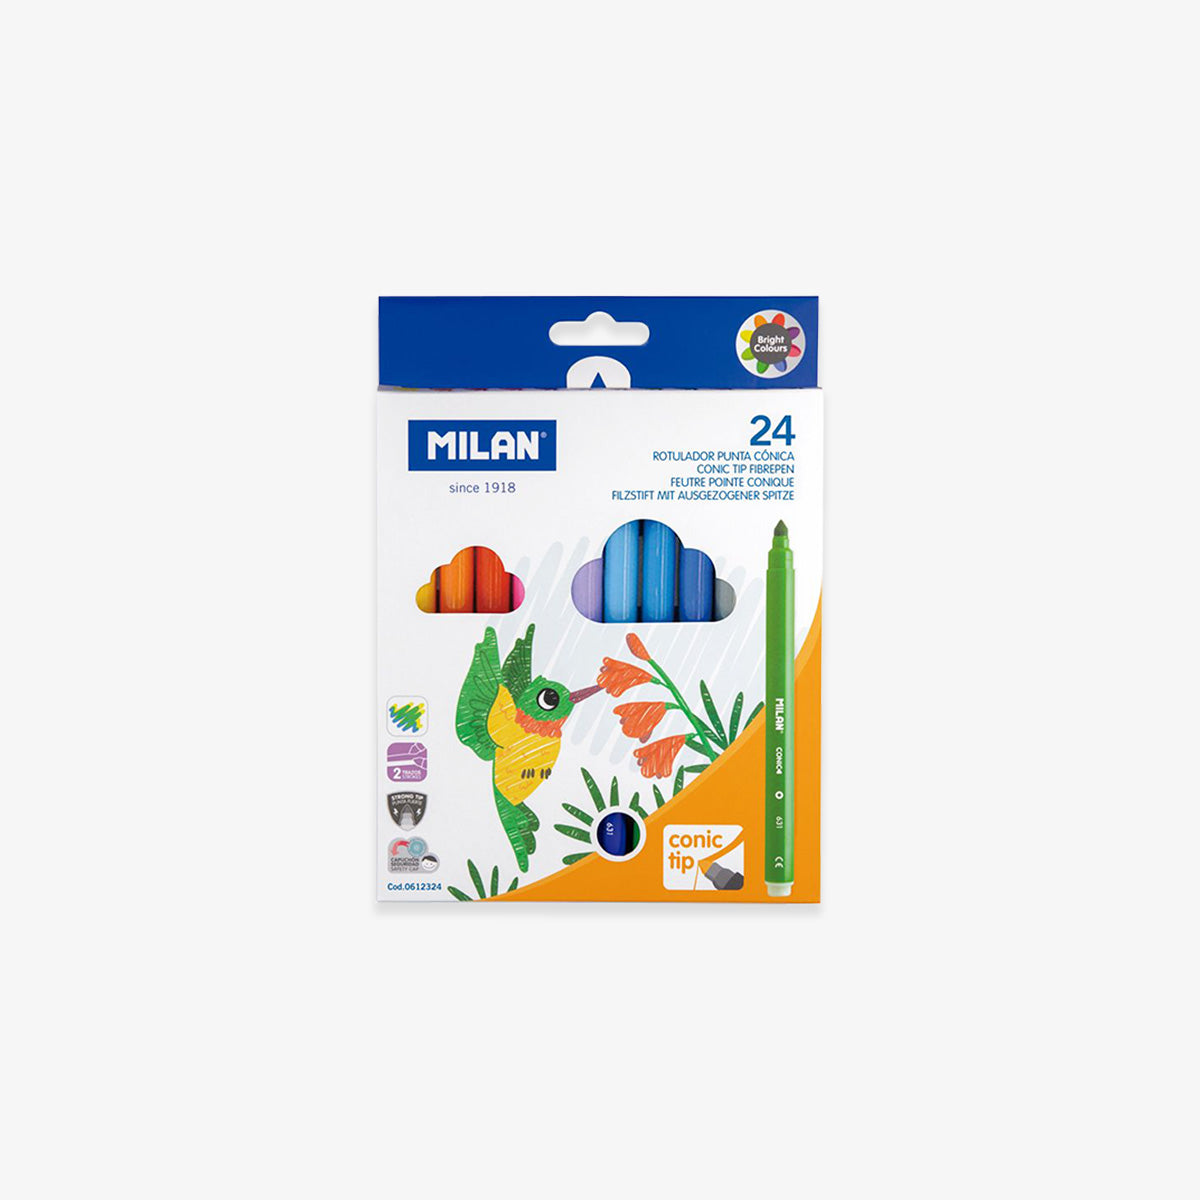 MILAN CONIC TIP COLOURED MARKERS // SET OF 24